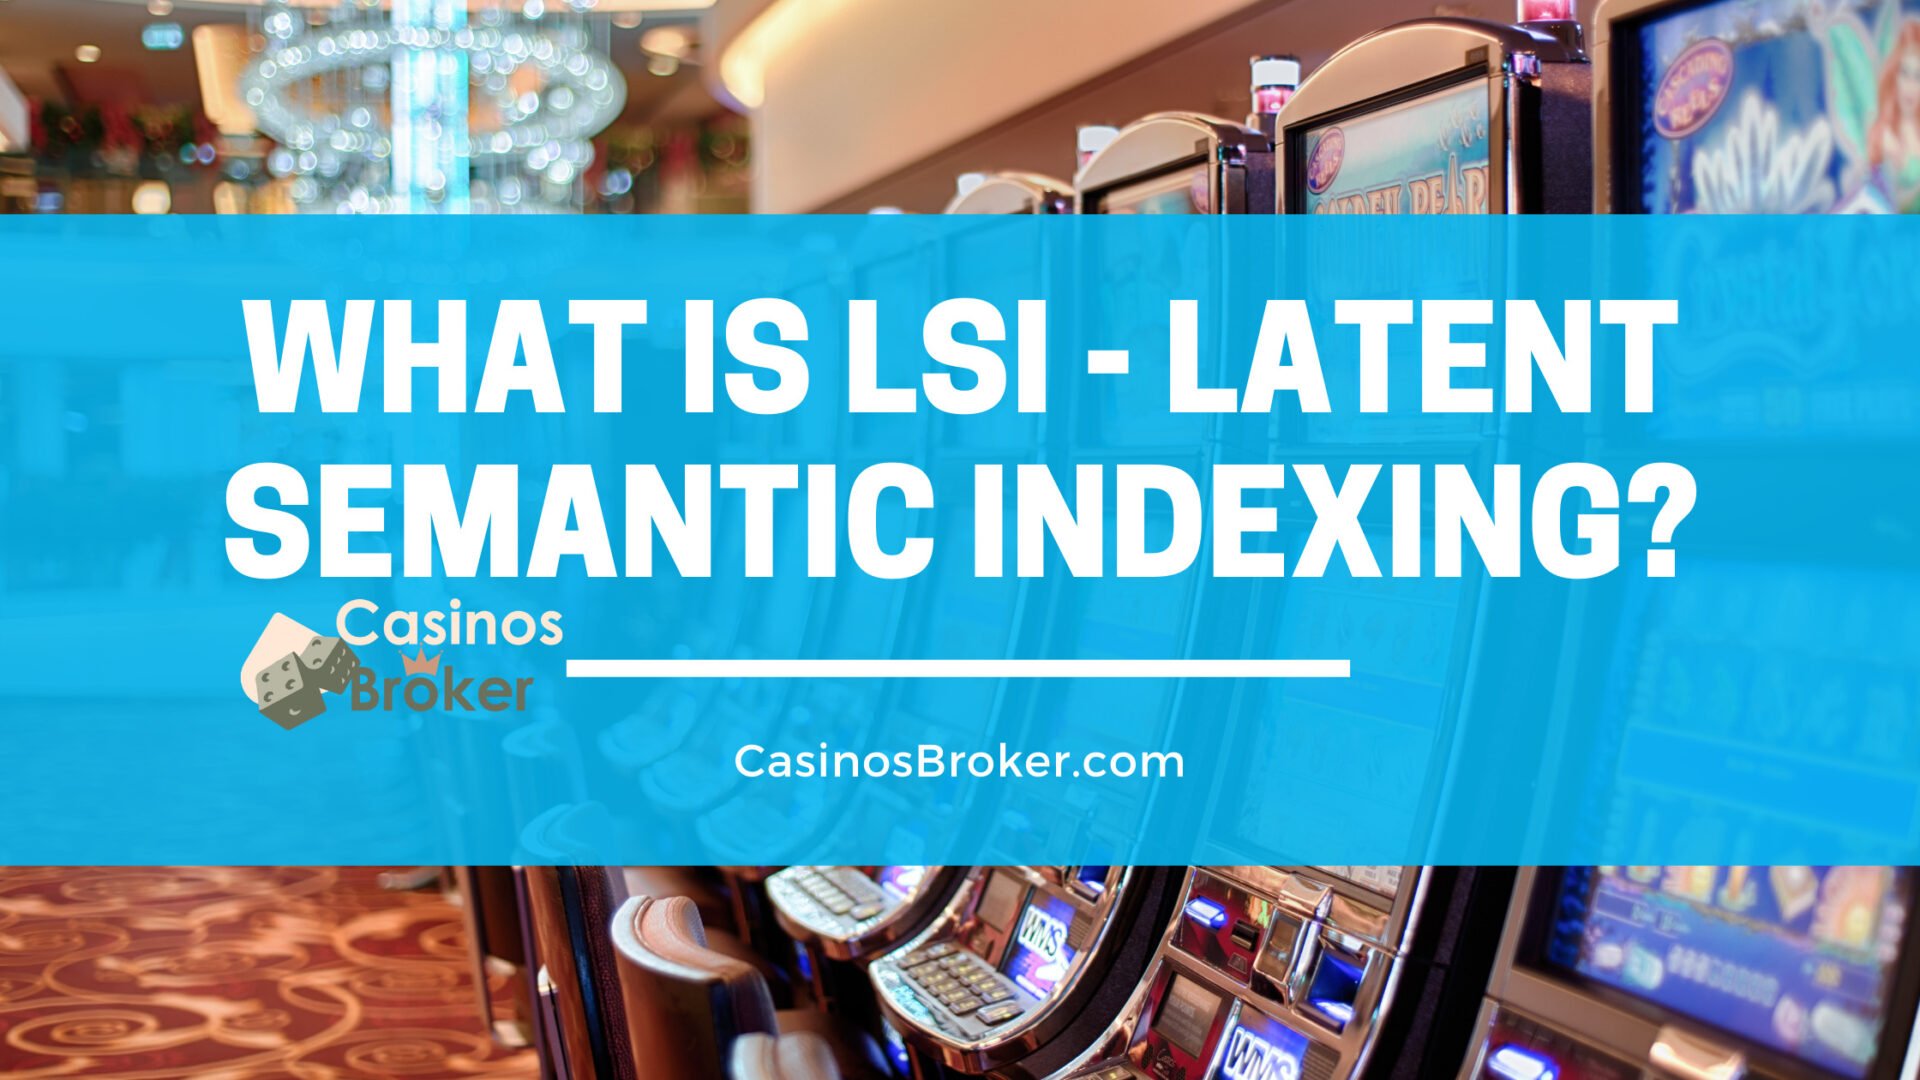 What is LSI – latent semantic indexing?